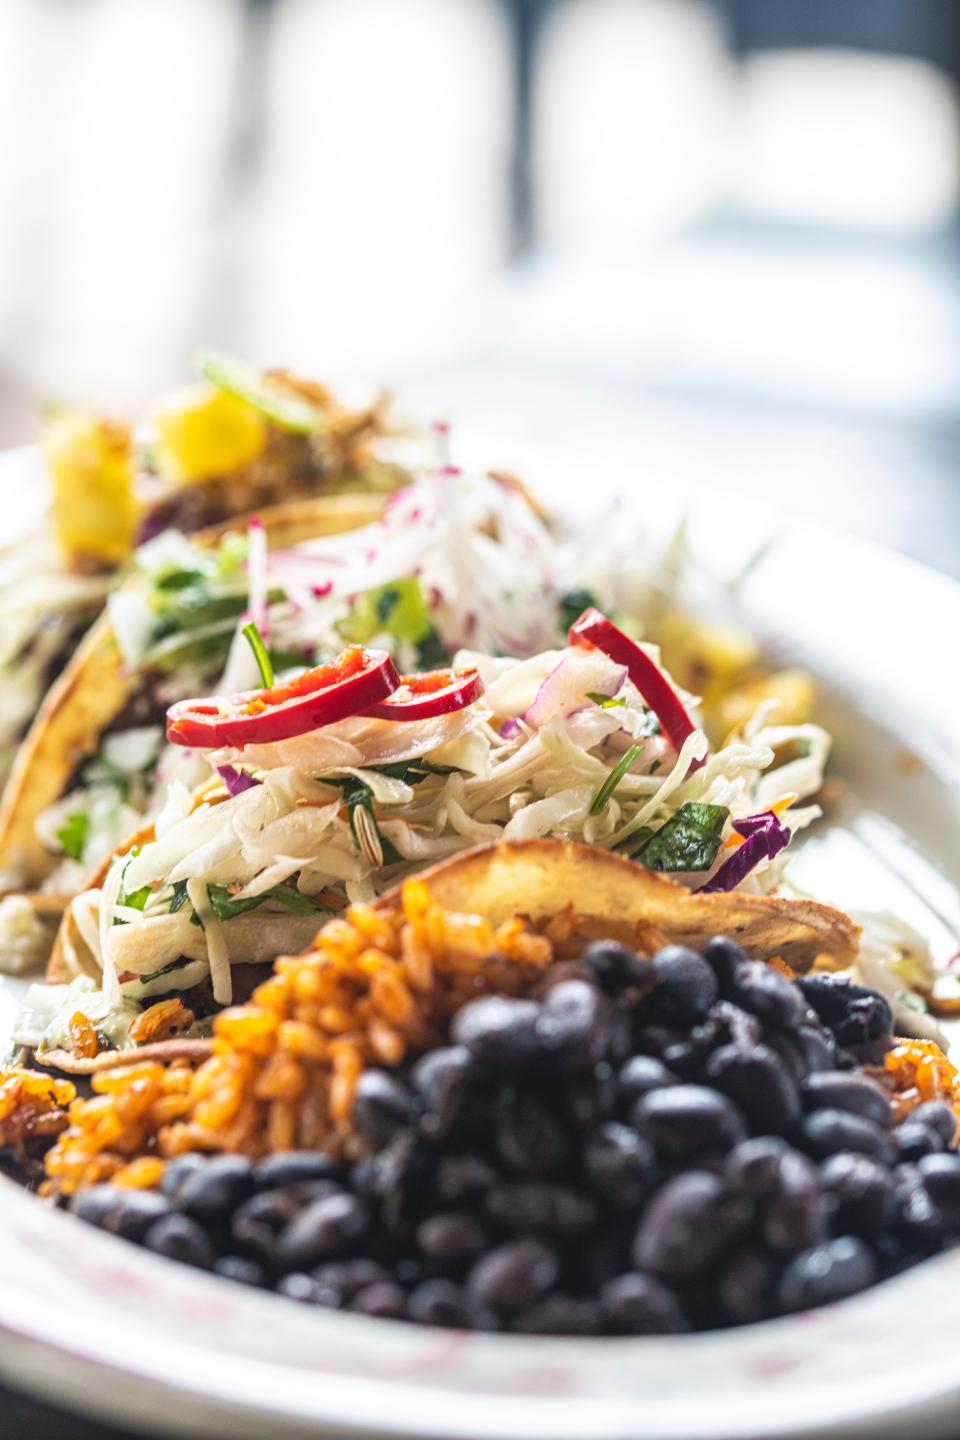 Tacos with a side of Mexican rice and black beans at El Camino are calling to you.